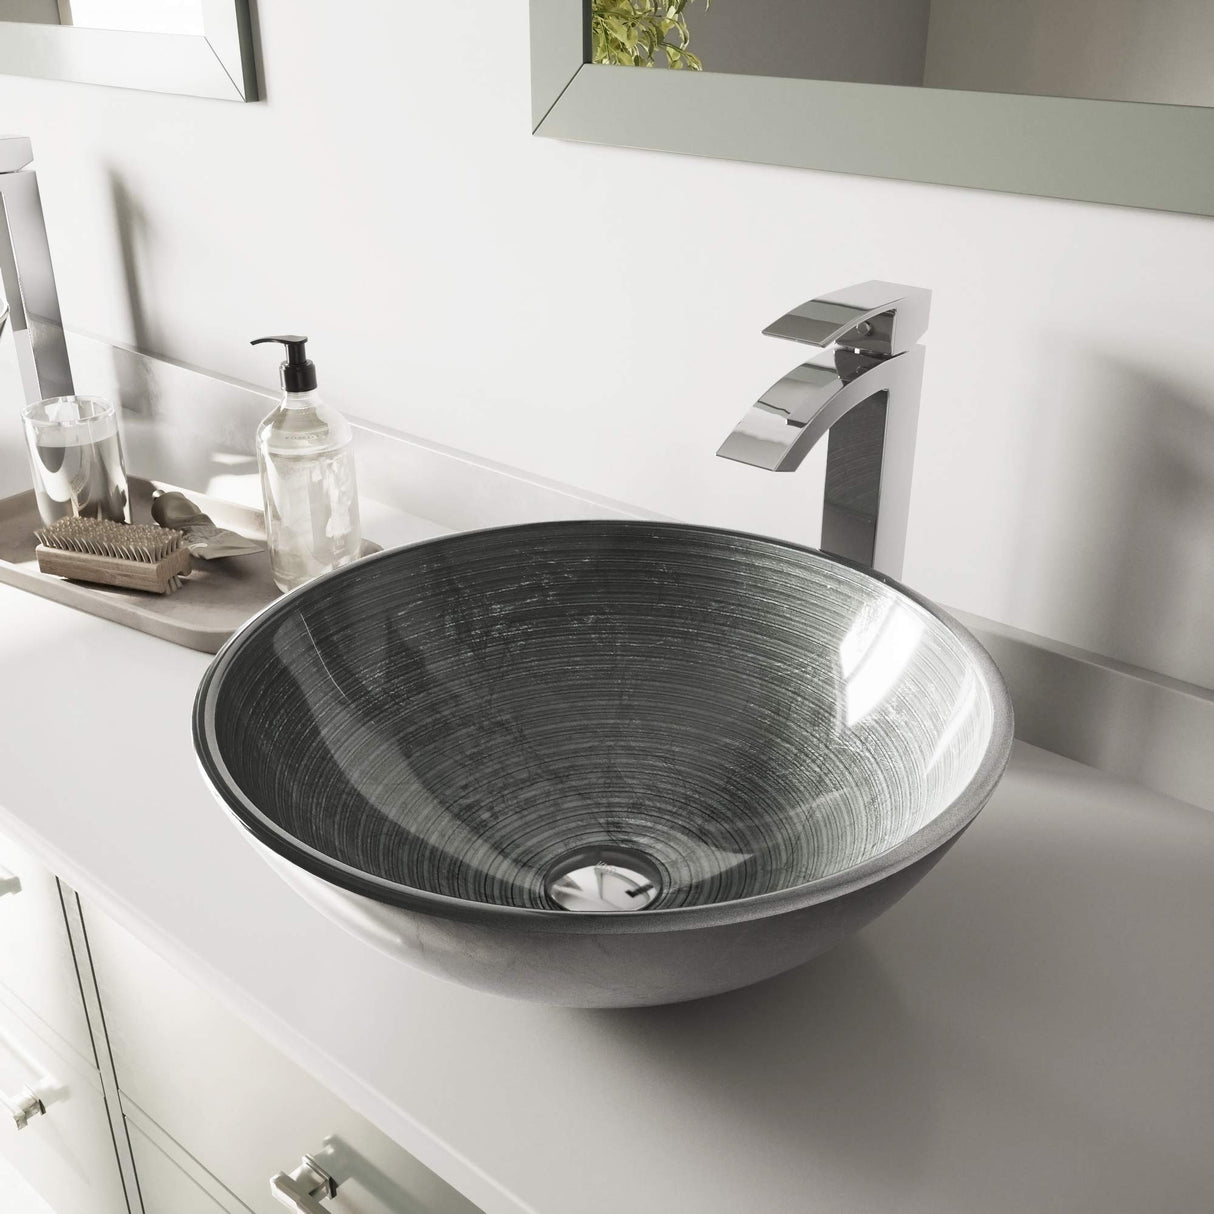 VIGO VGT836 16.5" L -16.5" W -12.0" H Handmade Glass Round Vessel Bathroom Sink Set in Simply Silver Finish with Chrome Single-Handle Single Hole Faucet and Pop Up Drain